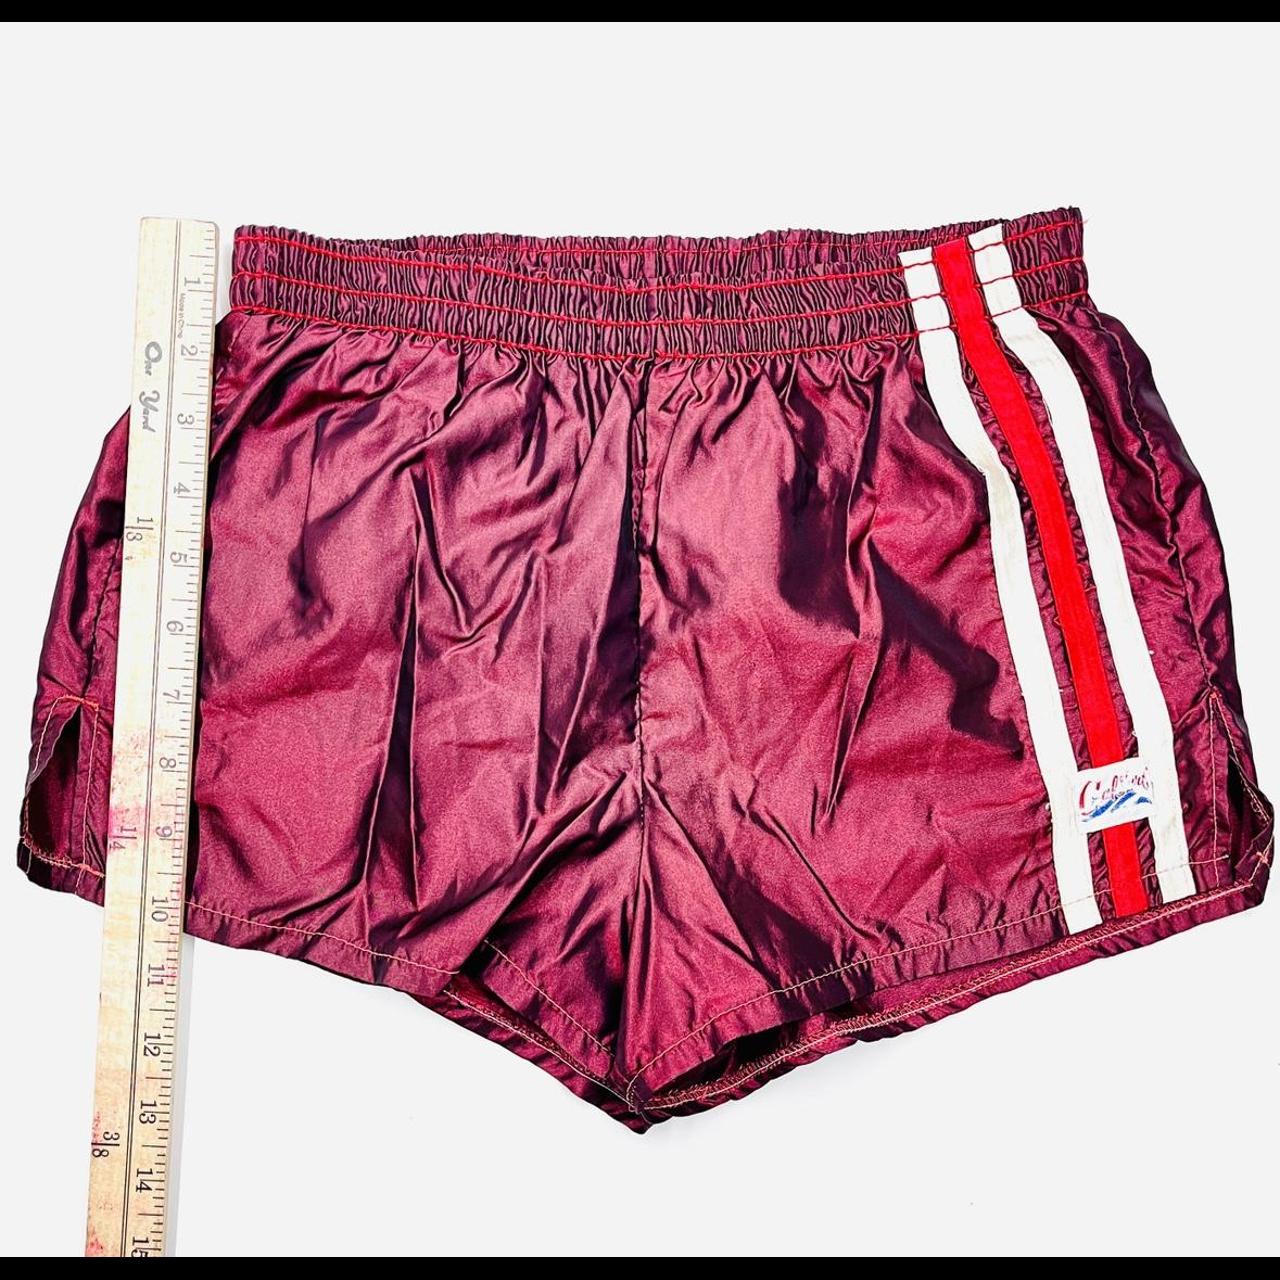 California Waves Women's Burgundy and Red Shorts (6)